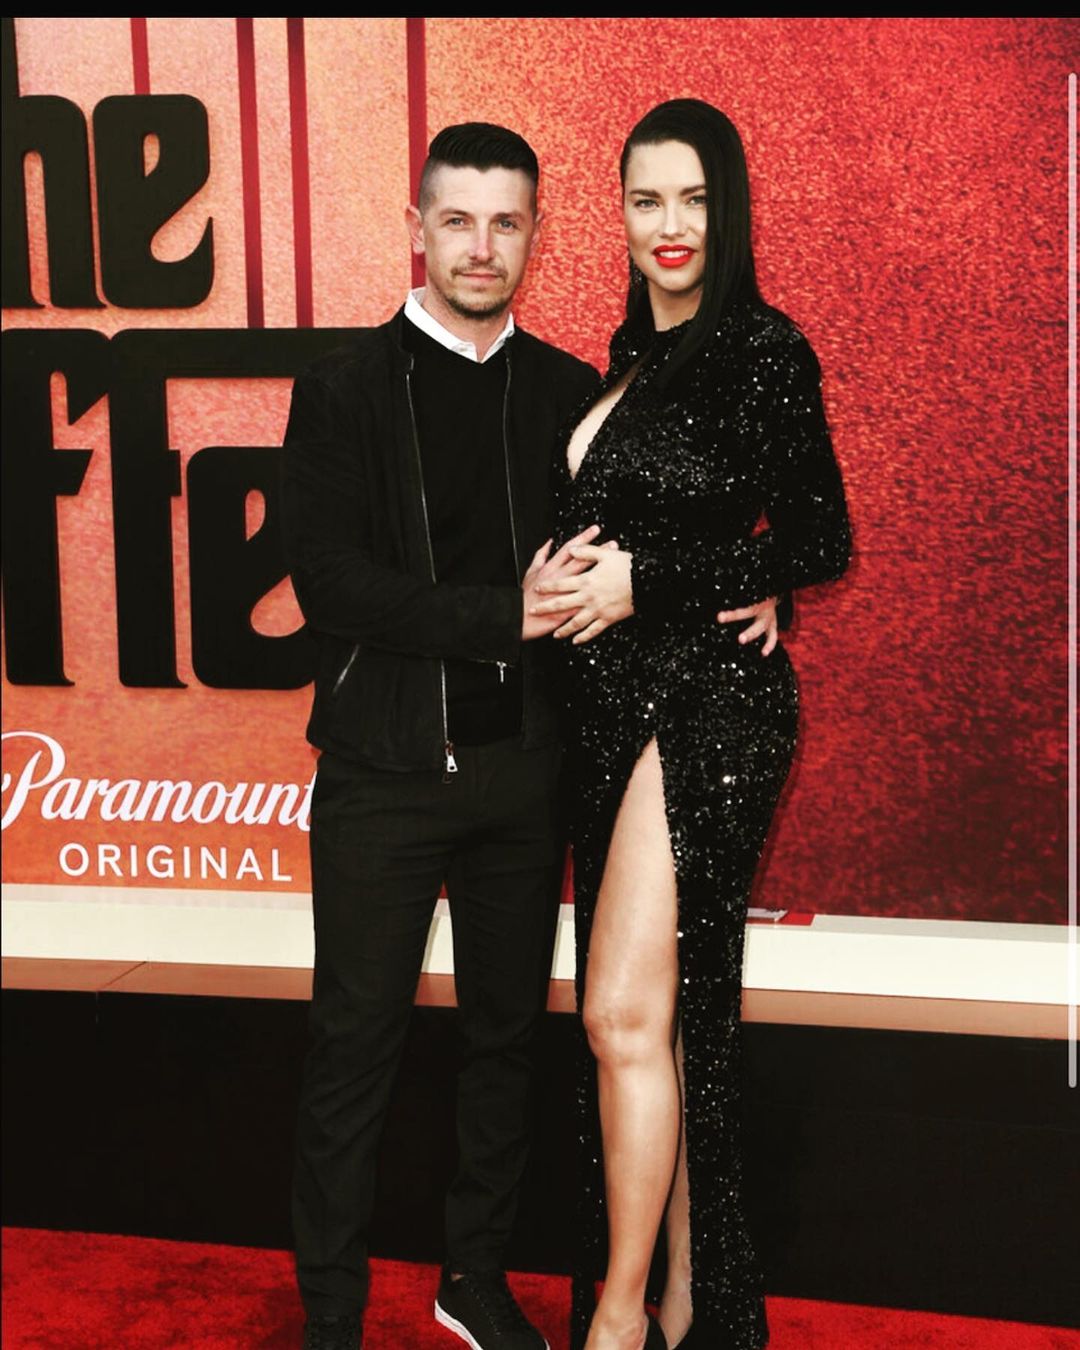 ???? Yesterday at the premiere of @theoffer.movie with my 2 loves. ????  #TheOffer @ParamountPlus
Dress: @michaelcostello
Shoes: @sarahflint_nyc @itb_worldwide
Earring: @anabelachan @doraziopr
Hair: @thedustinbaker
Make Up: @kristinhilton